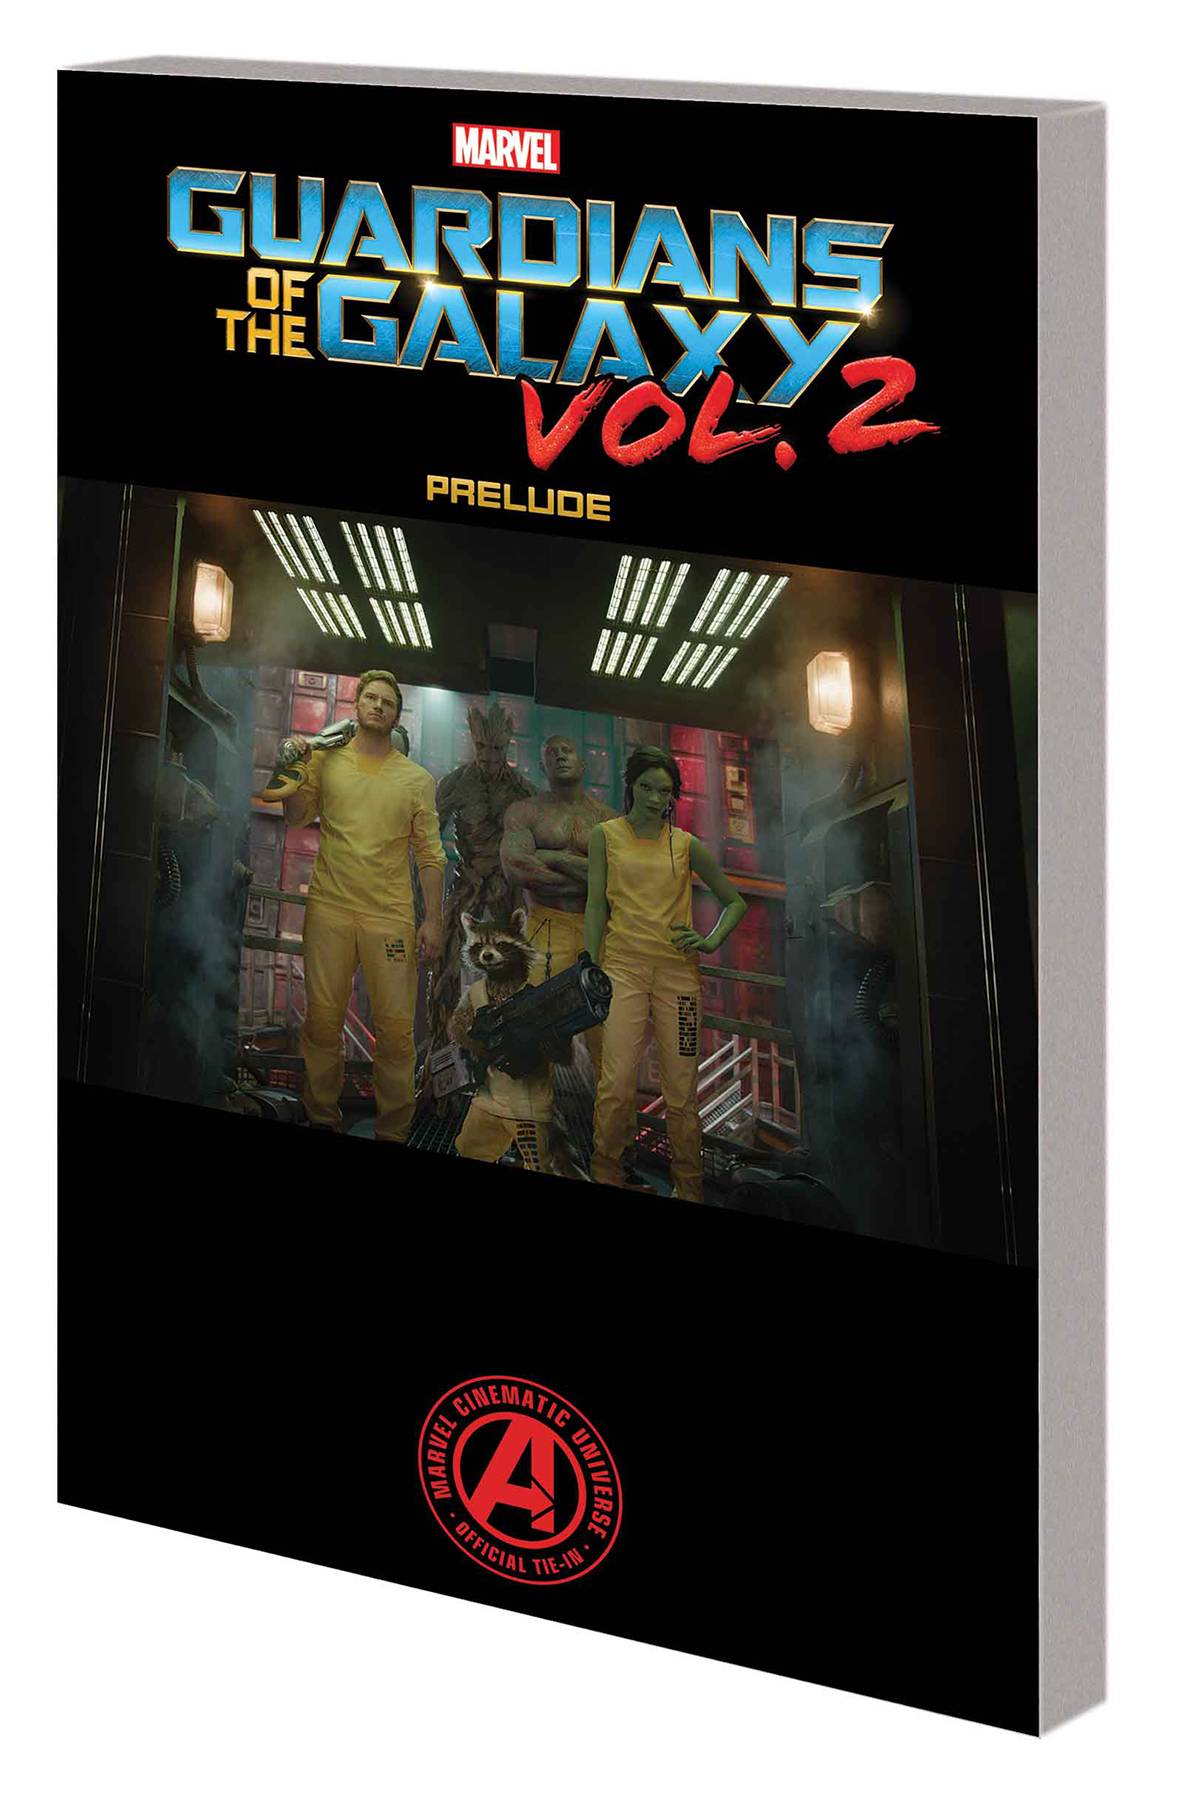 Marvels Guardians of Galaxy Prelude Graphic Novel Volume 2